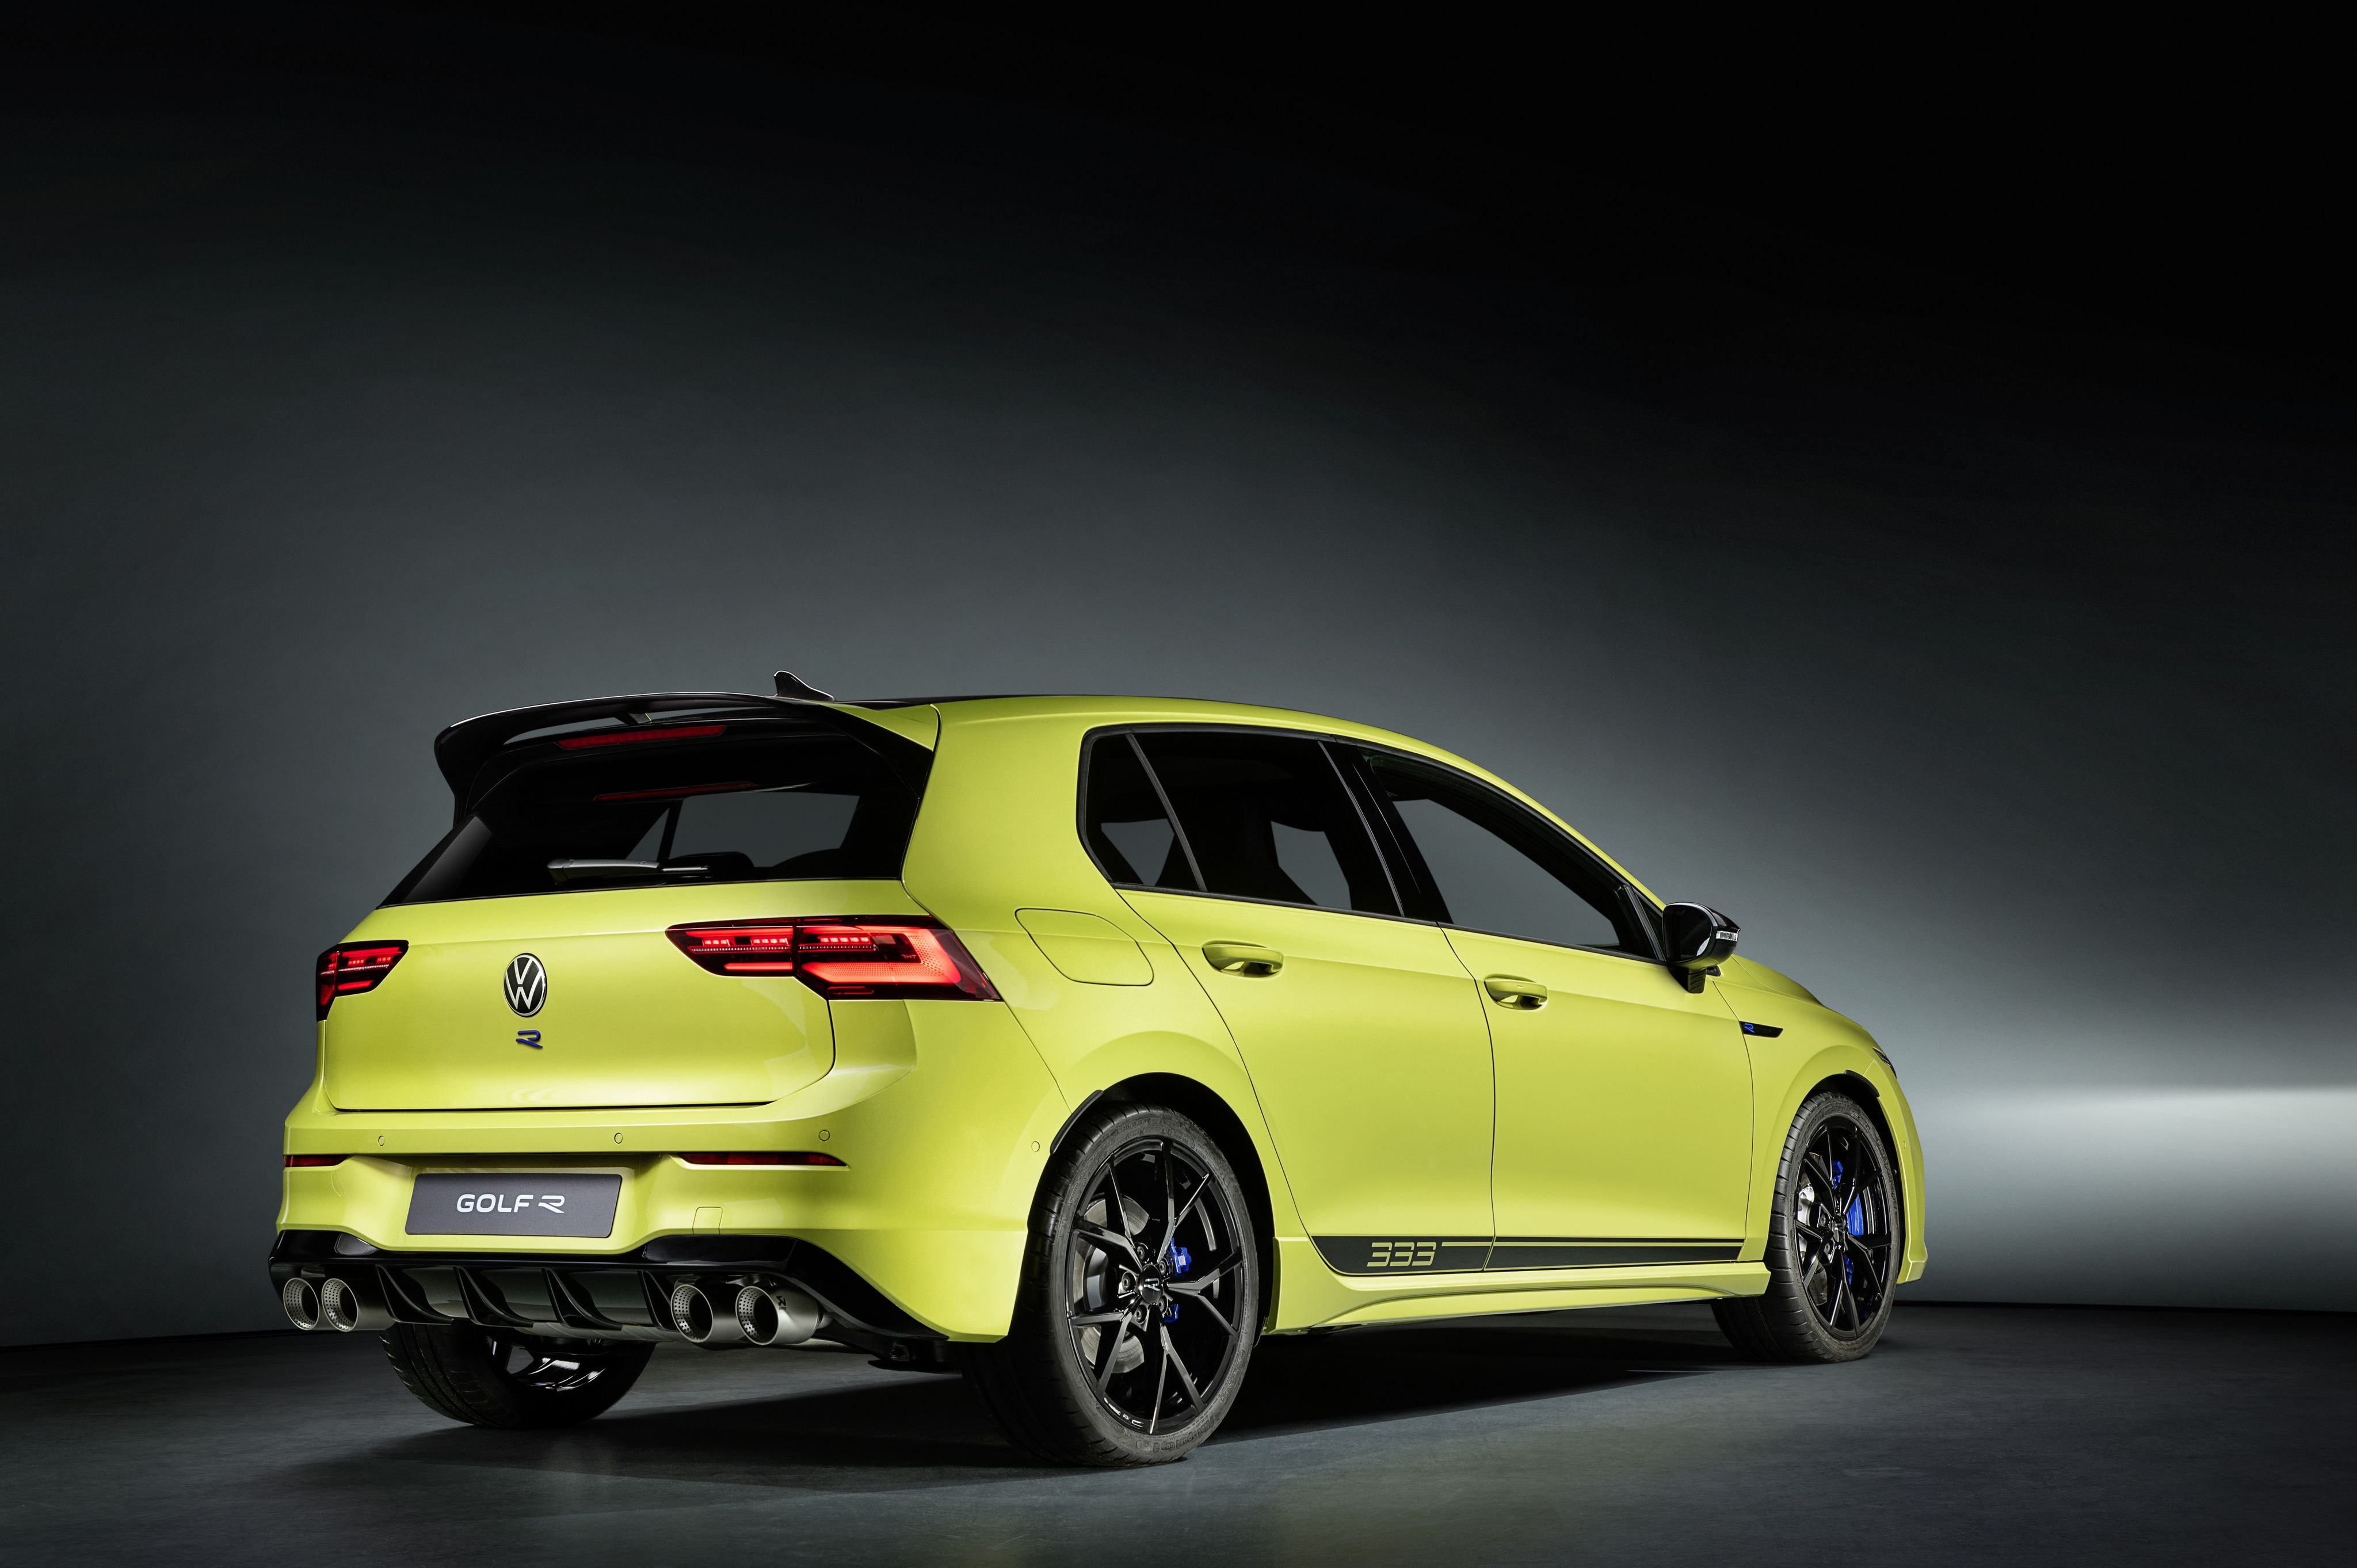 VW Golf R 333 Edition Is Bright Yellow and Absurdly Expensive